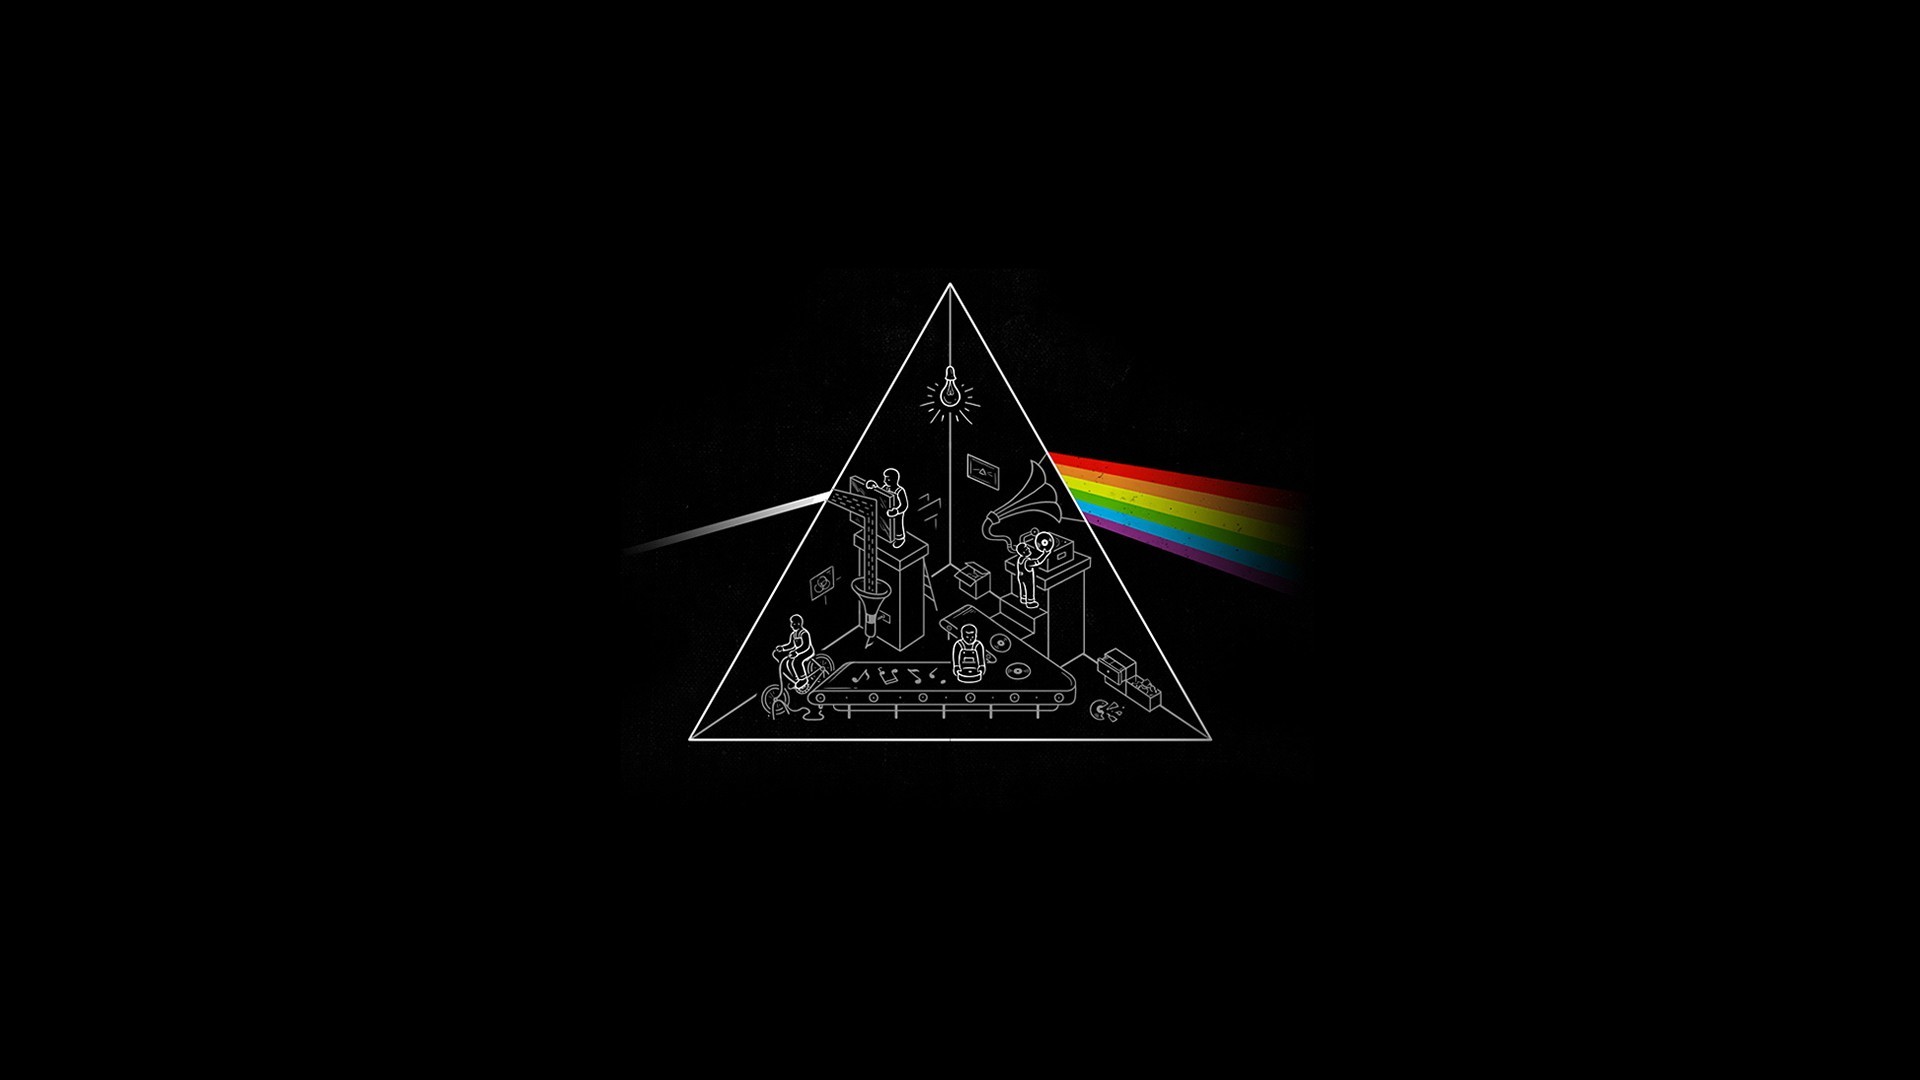 1920x1080 Pink Floyd | iPhone Wallpaper 0 HTML code. Source URL:  http://wall.alphacoders.com/big.php